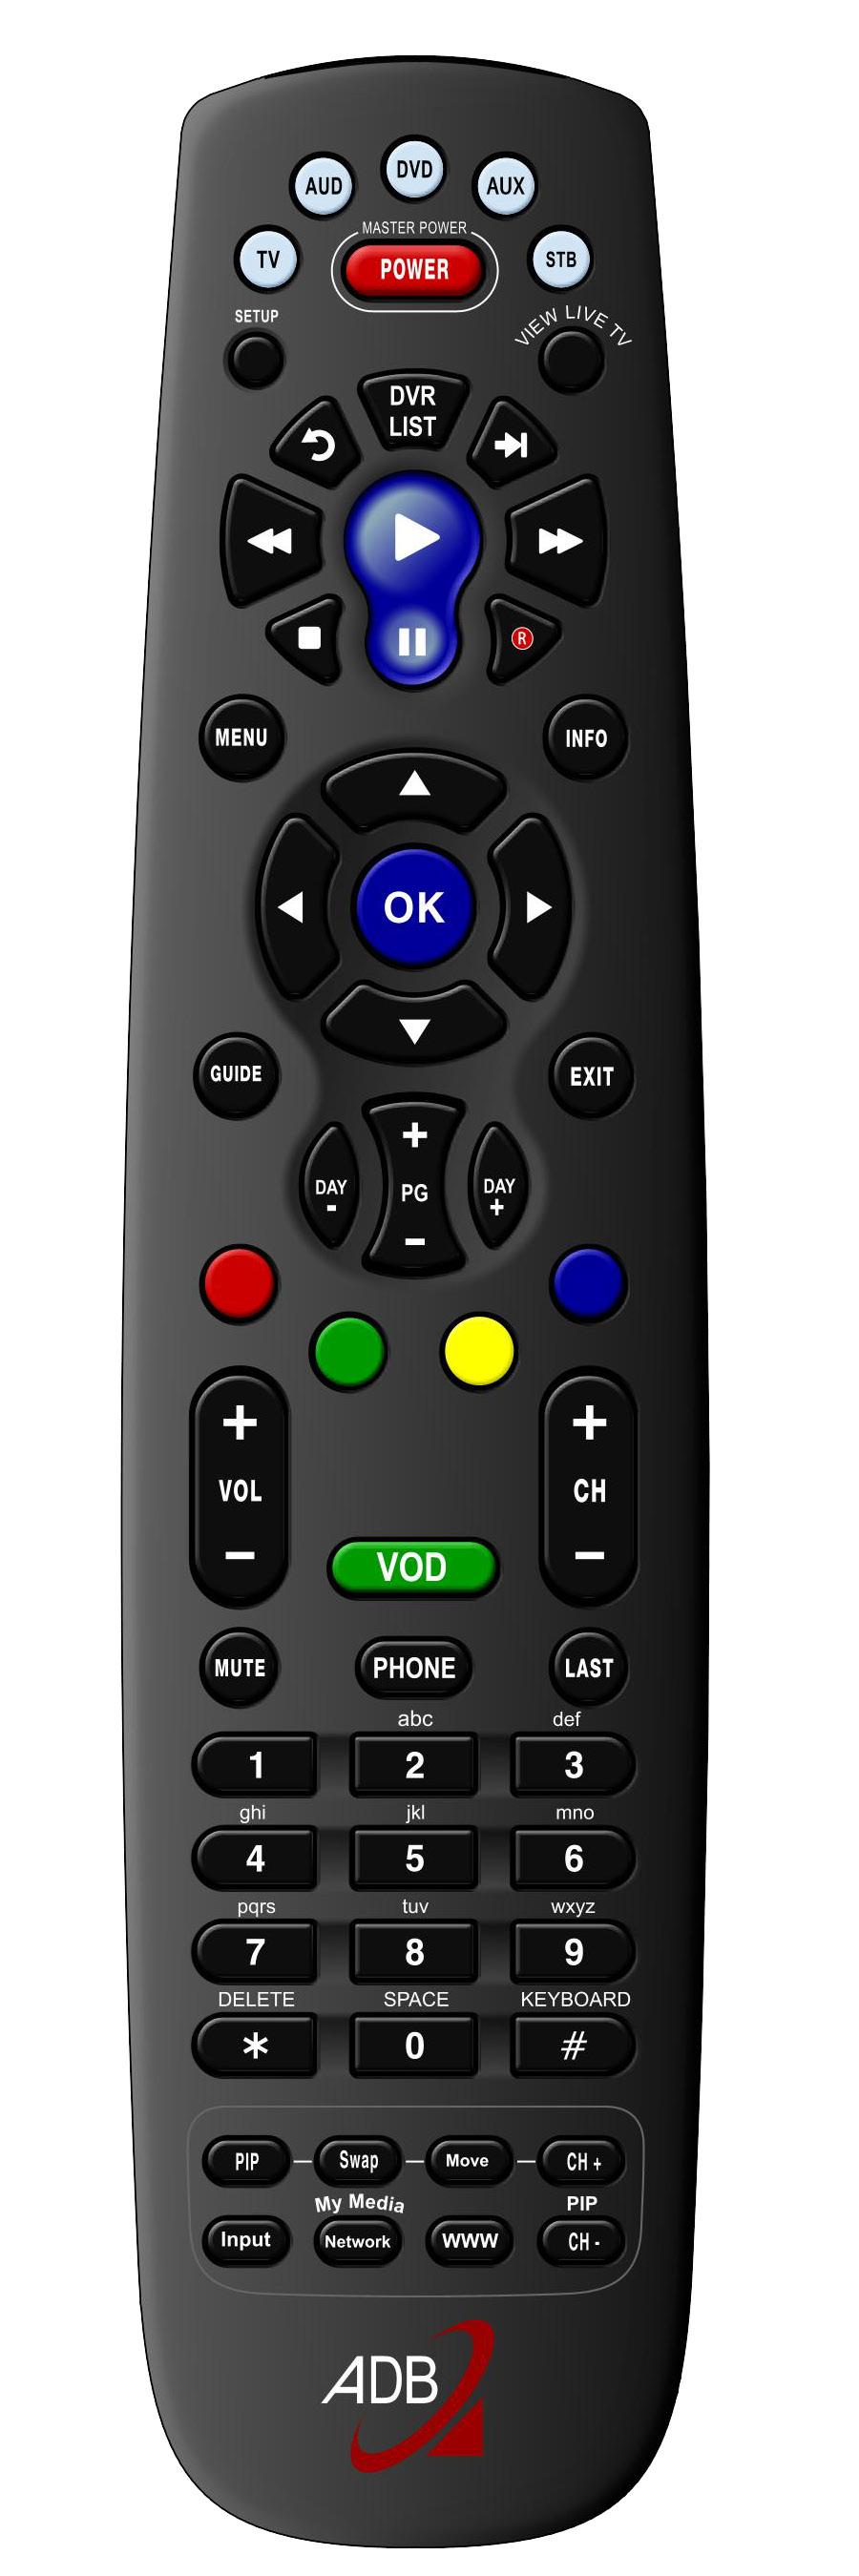 Pad Enter a channel number or PIN POWER Turn a selected device on/off Playback Controls Control playback of DVD, DVR or VOD Record Begin DVR recording INFO Display the Info Bar